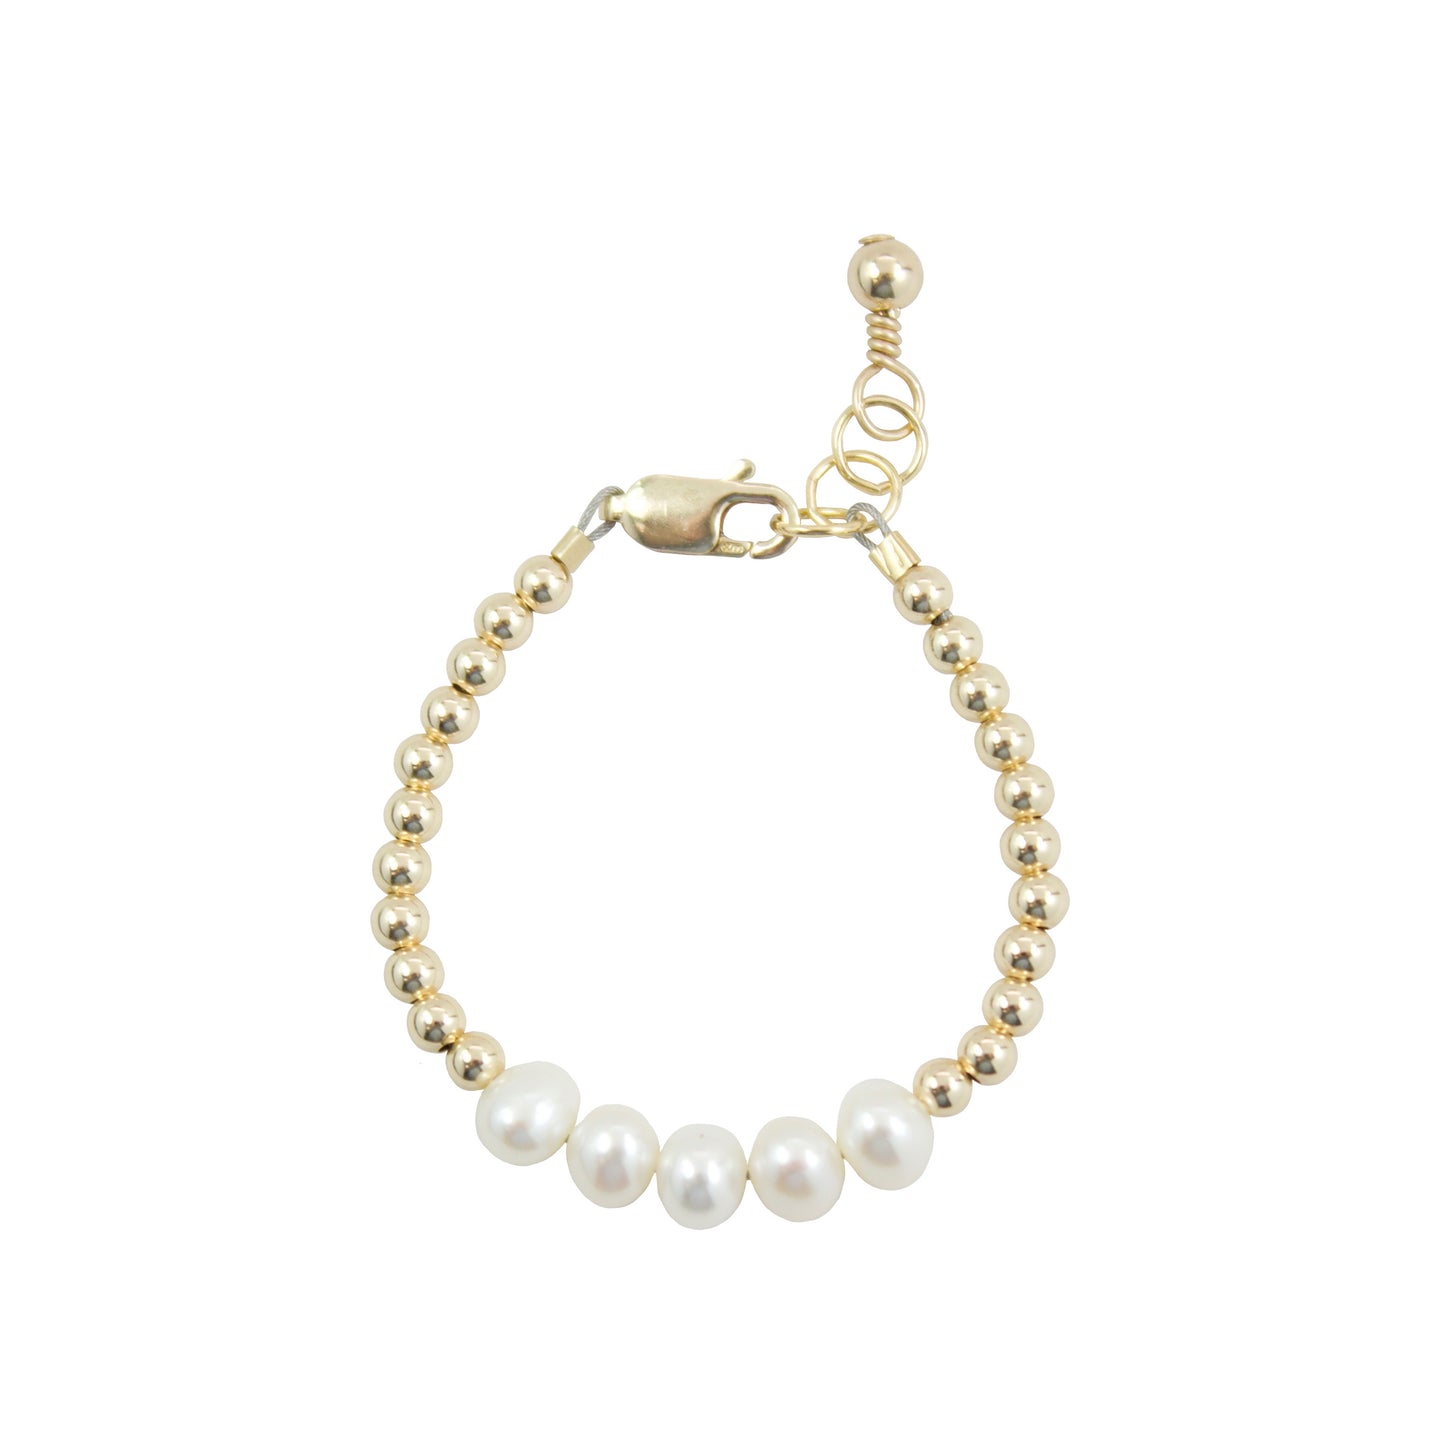 Personalised Pearl Necklaces and Bracelets